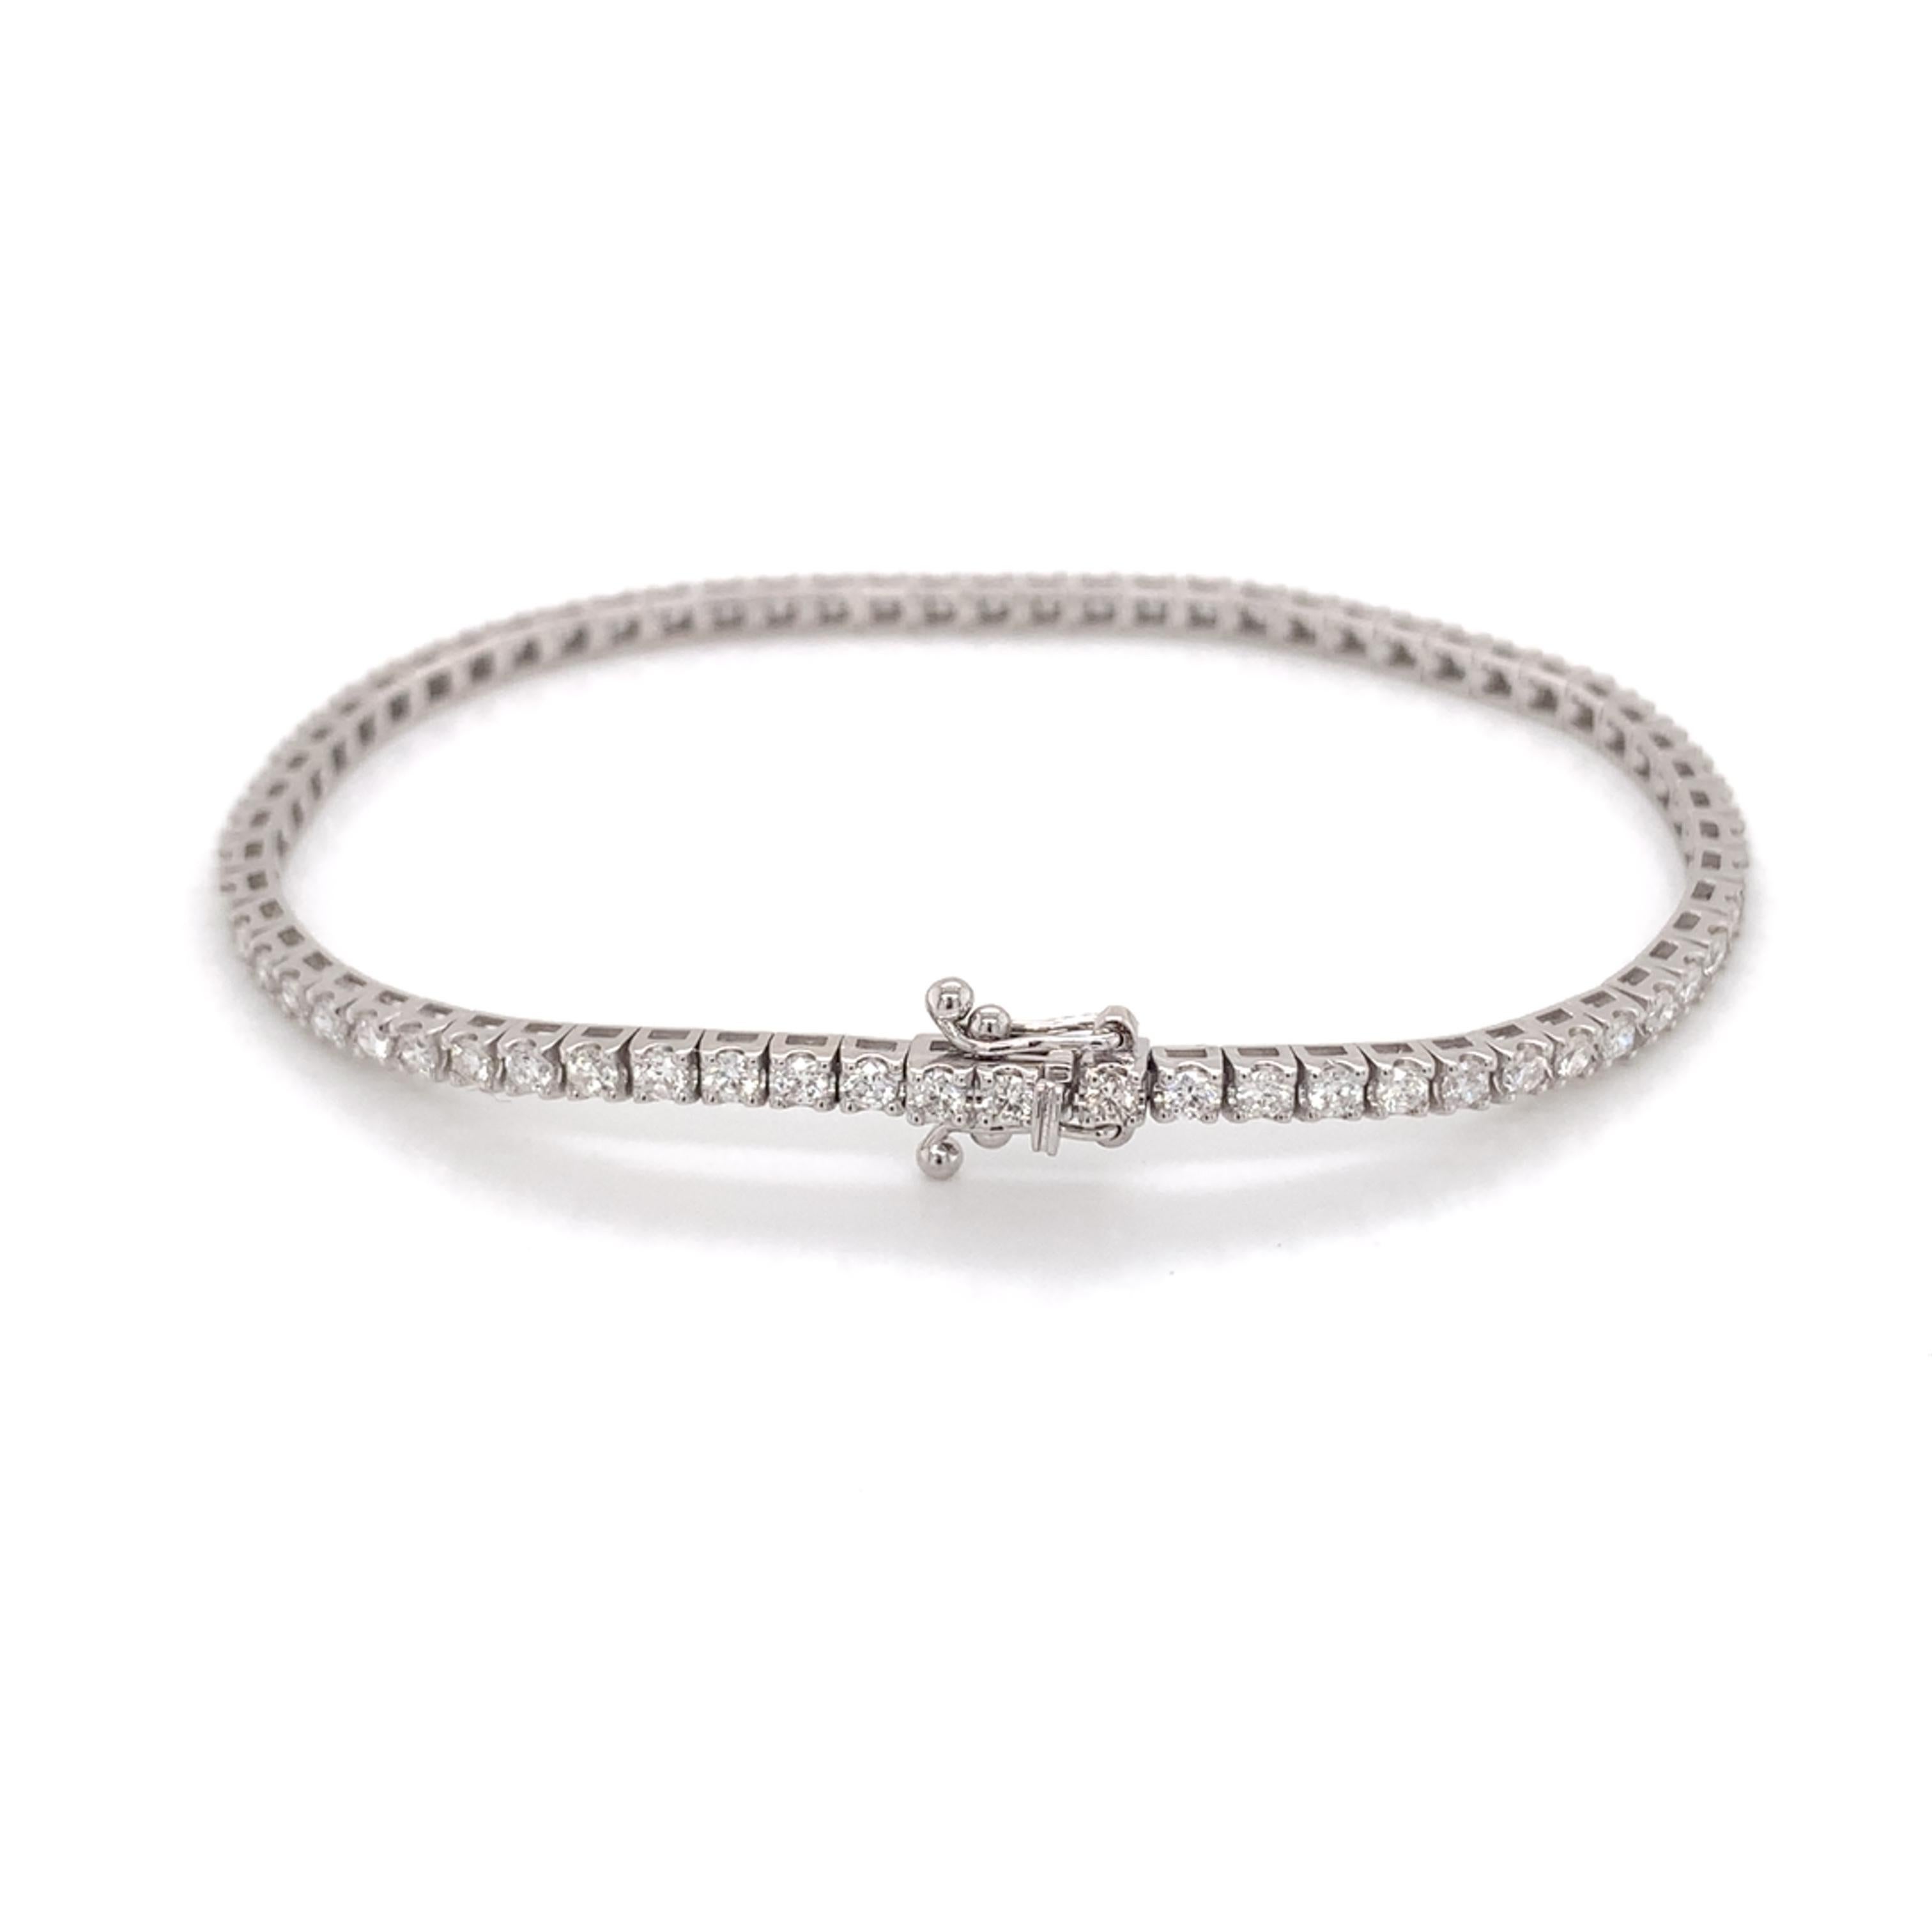 Medium sized tennis bracelet made with real/natural brilliant cut diamonds. Total diamond weight: 2.04 carats. Diamond Quantity: 66 round diamonds. Color: G. Clarity: SI. Mounted on 18kt white gold.